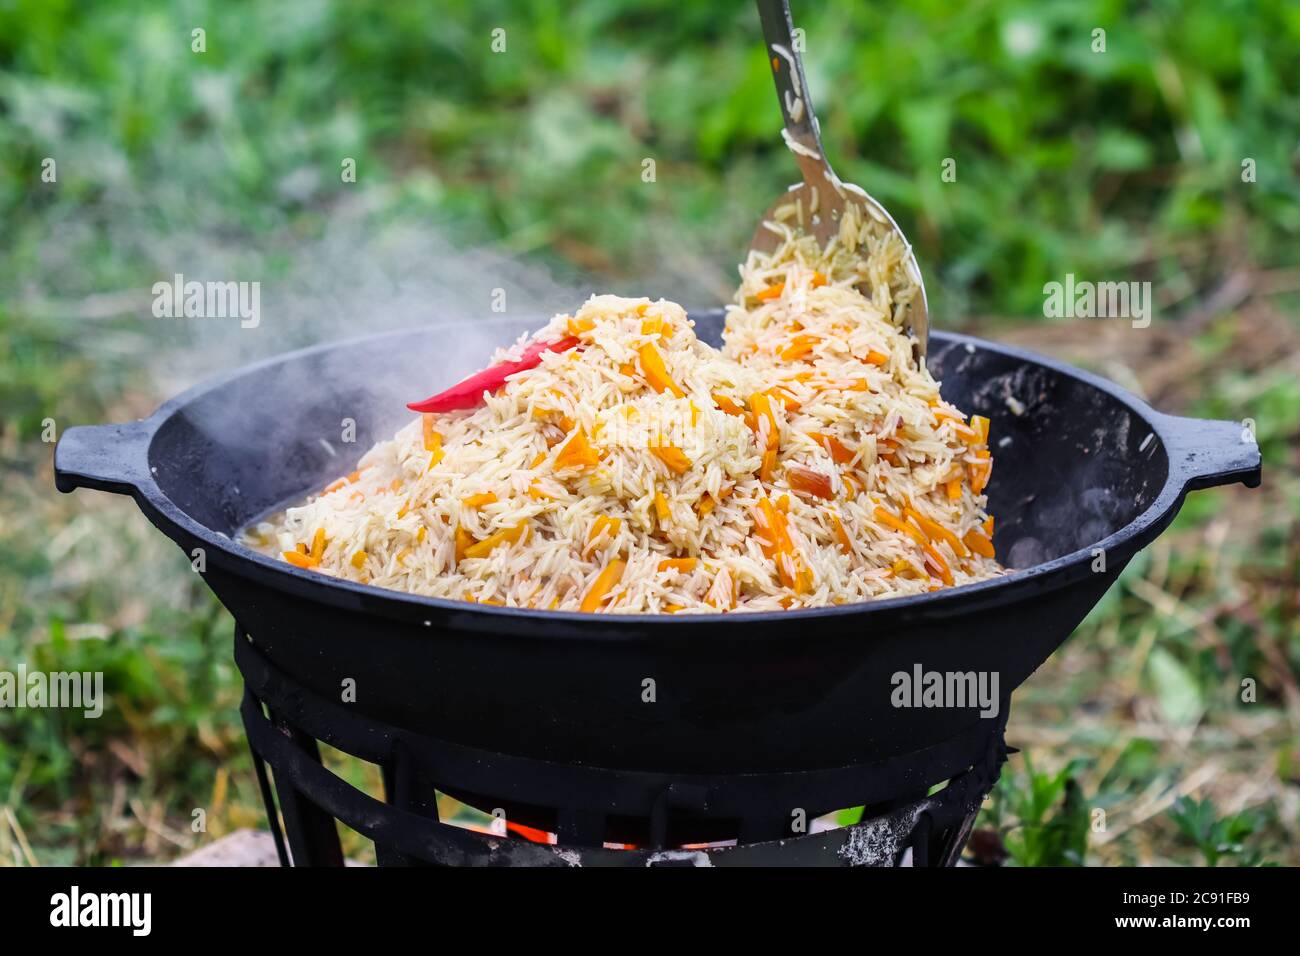 https://c8.alamy.com/comp/2C91FB9/cooking-rice-pilaf-in-a-large-cast-iron-pot-on-fire-2C91FB9.jpg